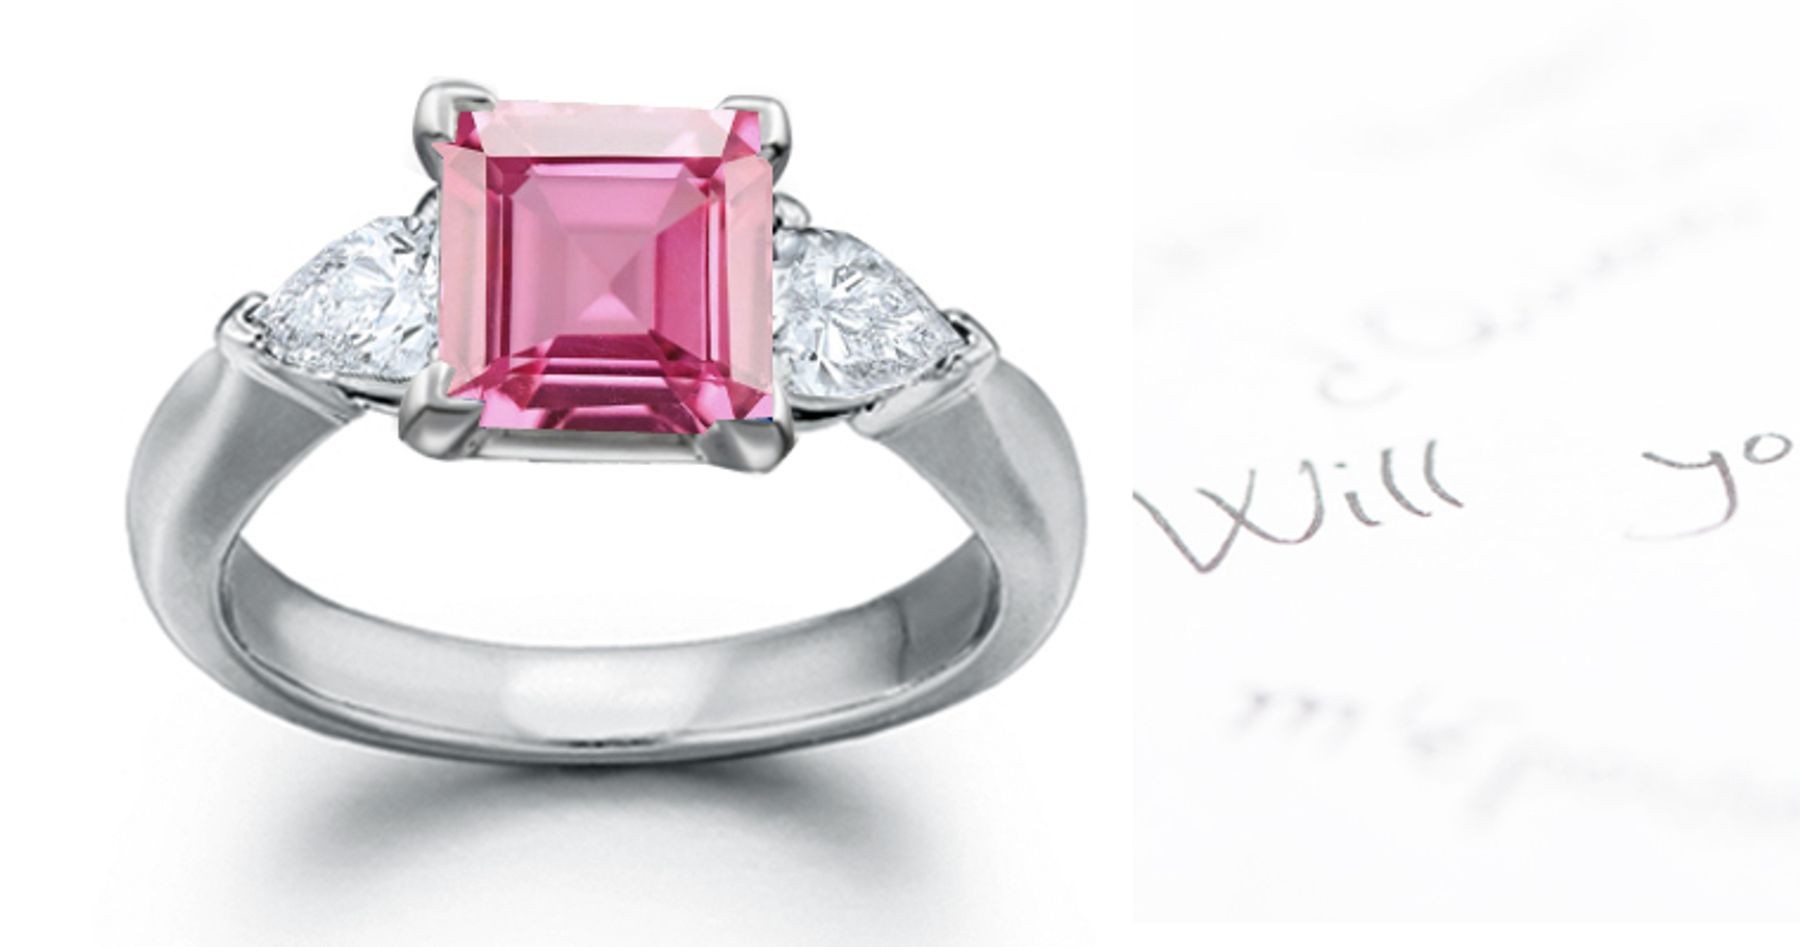 The Taurus Collection: 3 Stone Ladies Pink Square Sapphire & Pears White Diamonds Ring in Gold